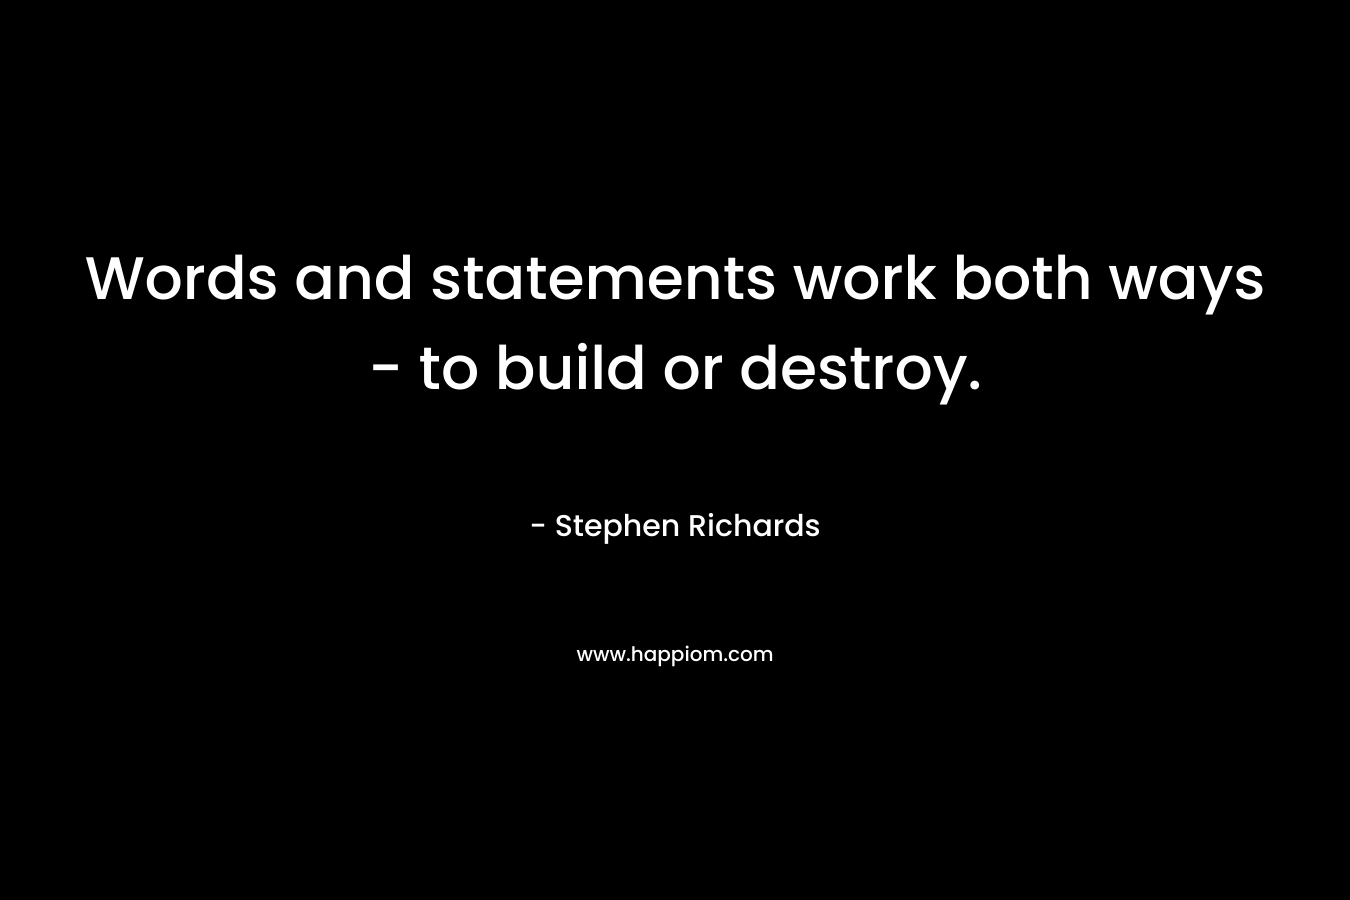 Words and statements work both ways - to build or destroy.